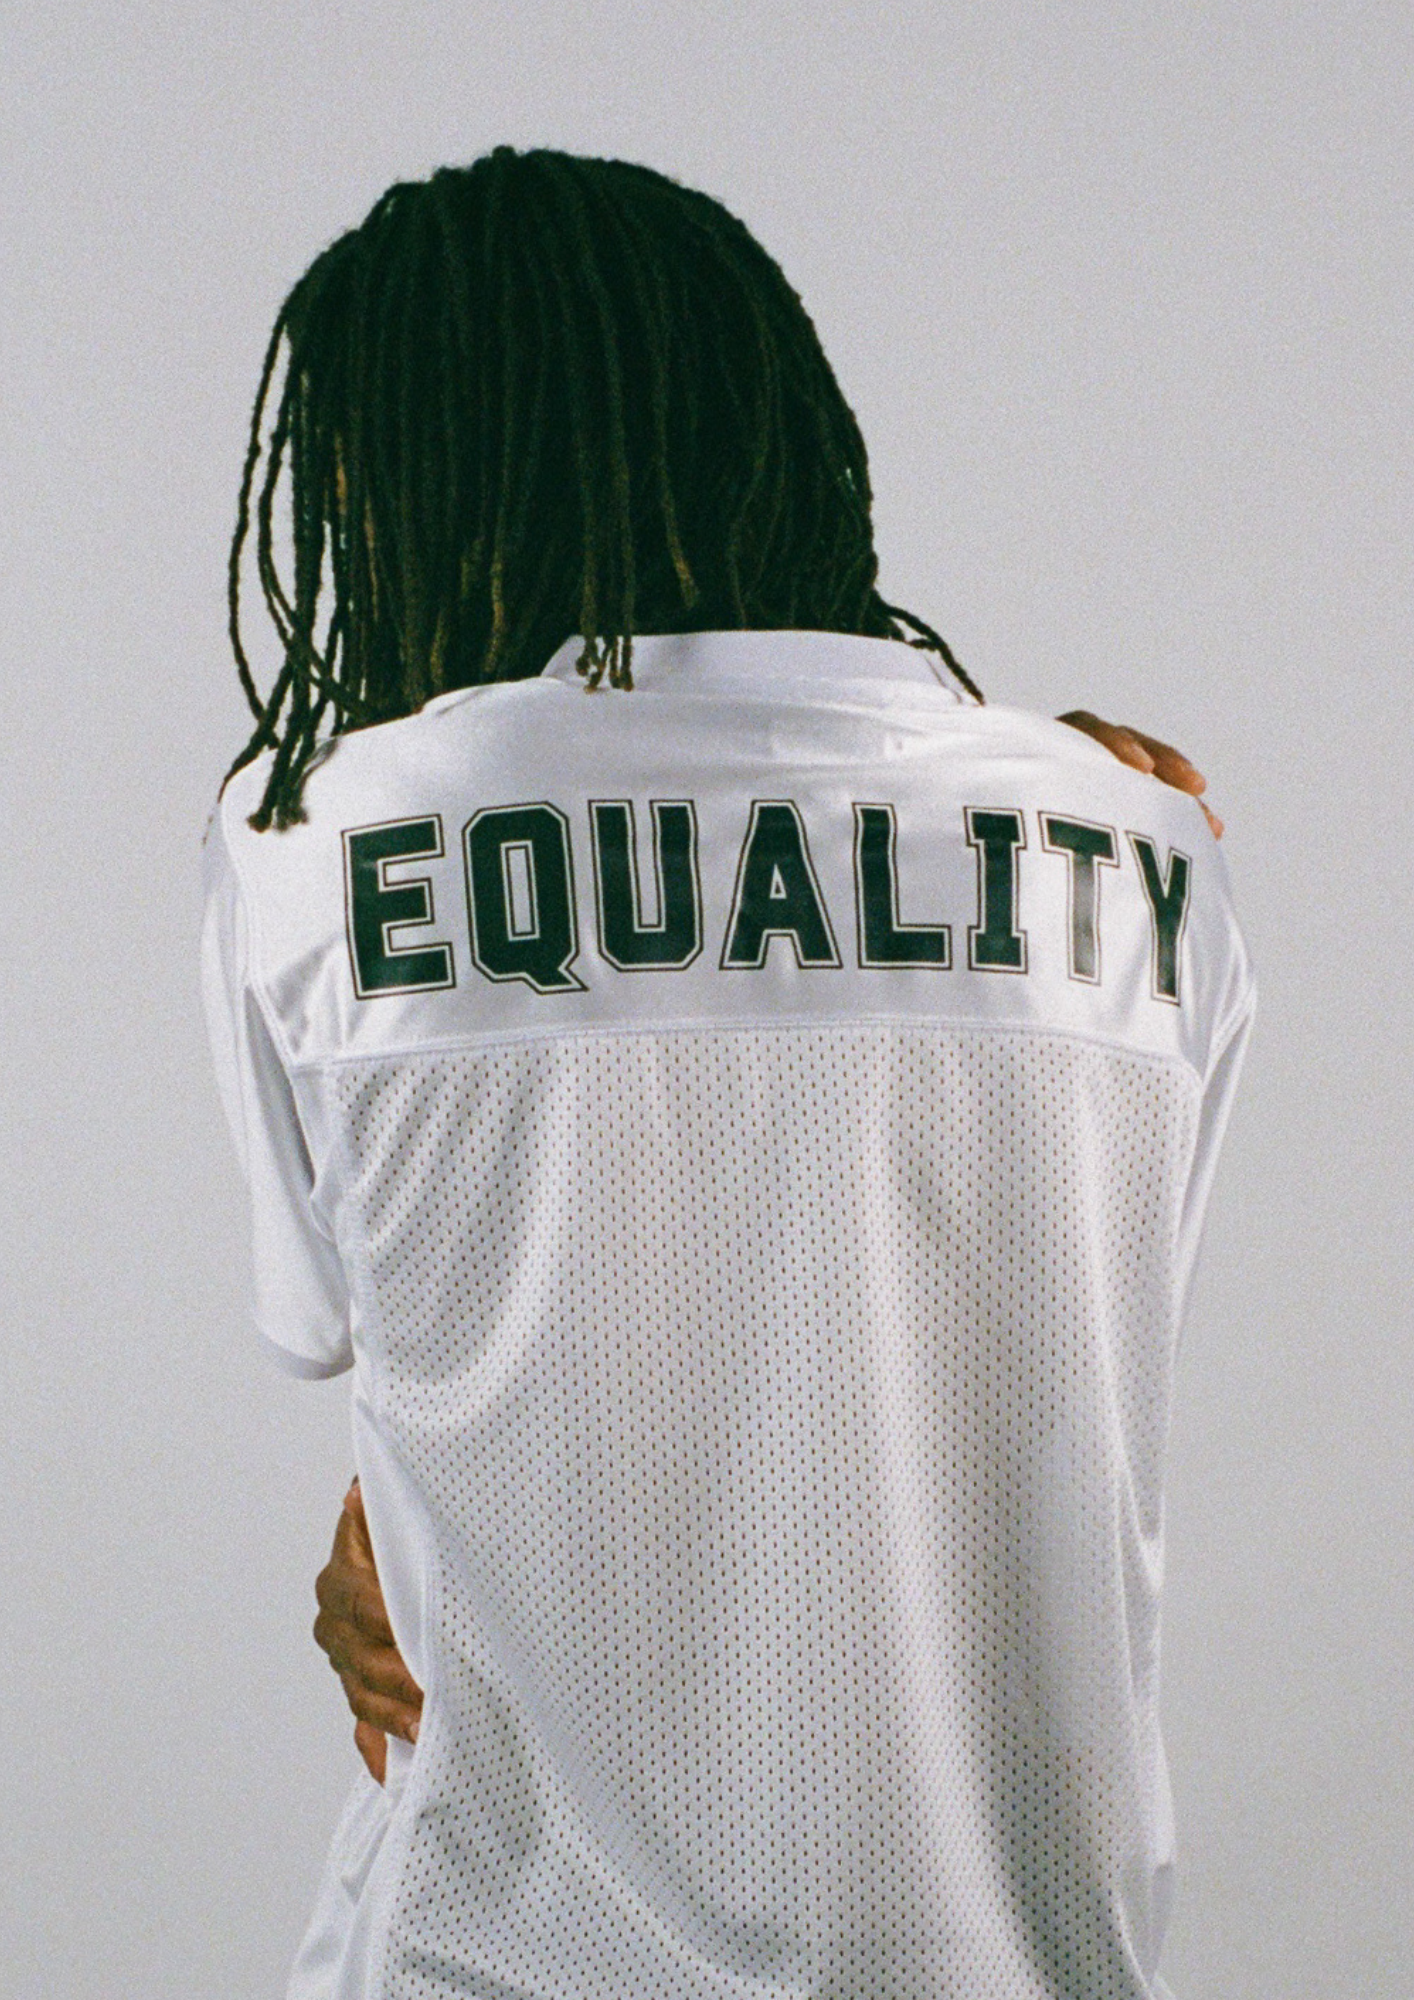 Football jersey EQUALITY white